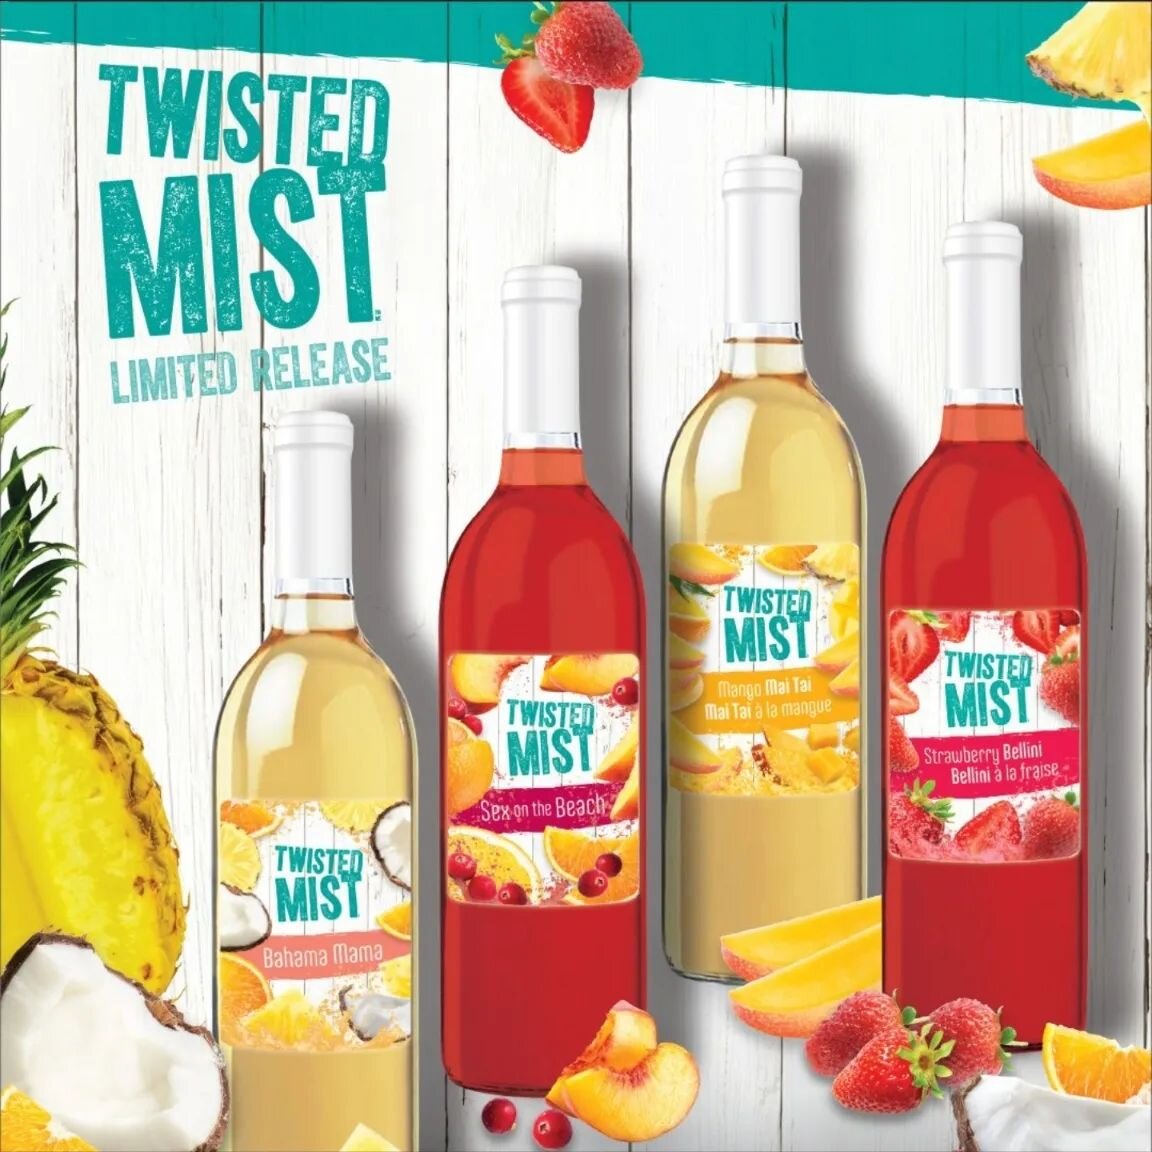 This year's summer Twisted Mist lineup is coming soon!

We have a couple of fan favorites from previous years making a return.  These will sell out quickly so call in to reserve yours. 

#yeg #yegvino #yegsummer #yegweddings #stalbert #athabasca #sta